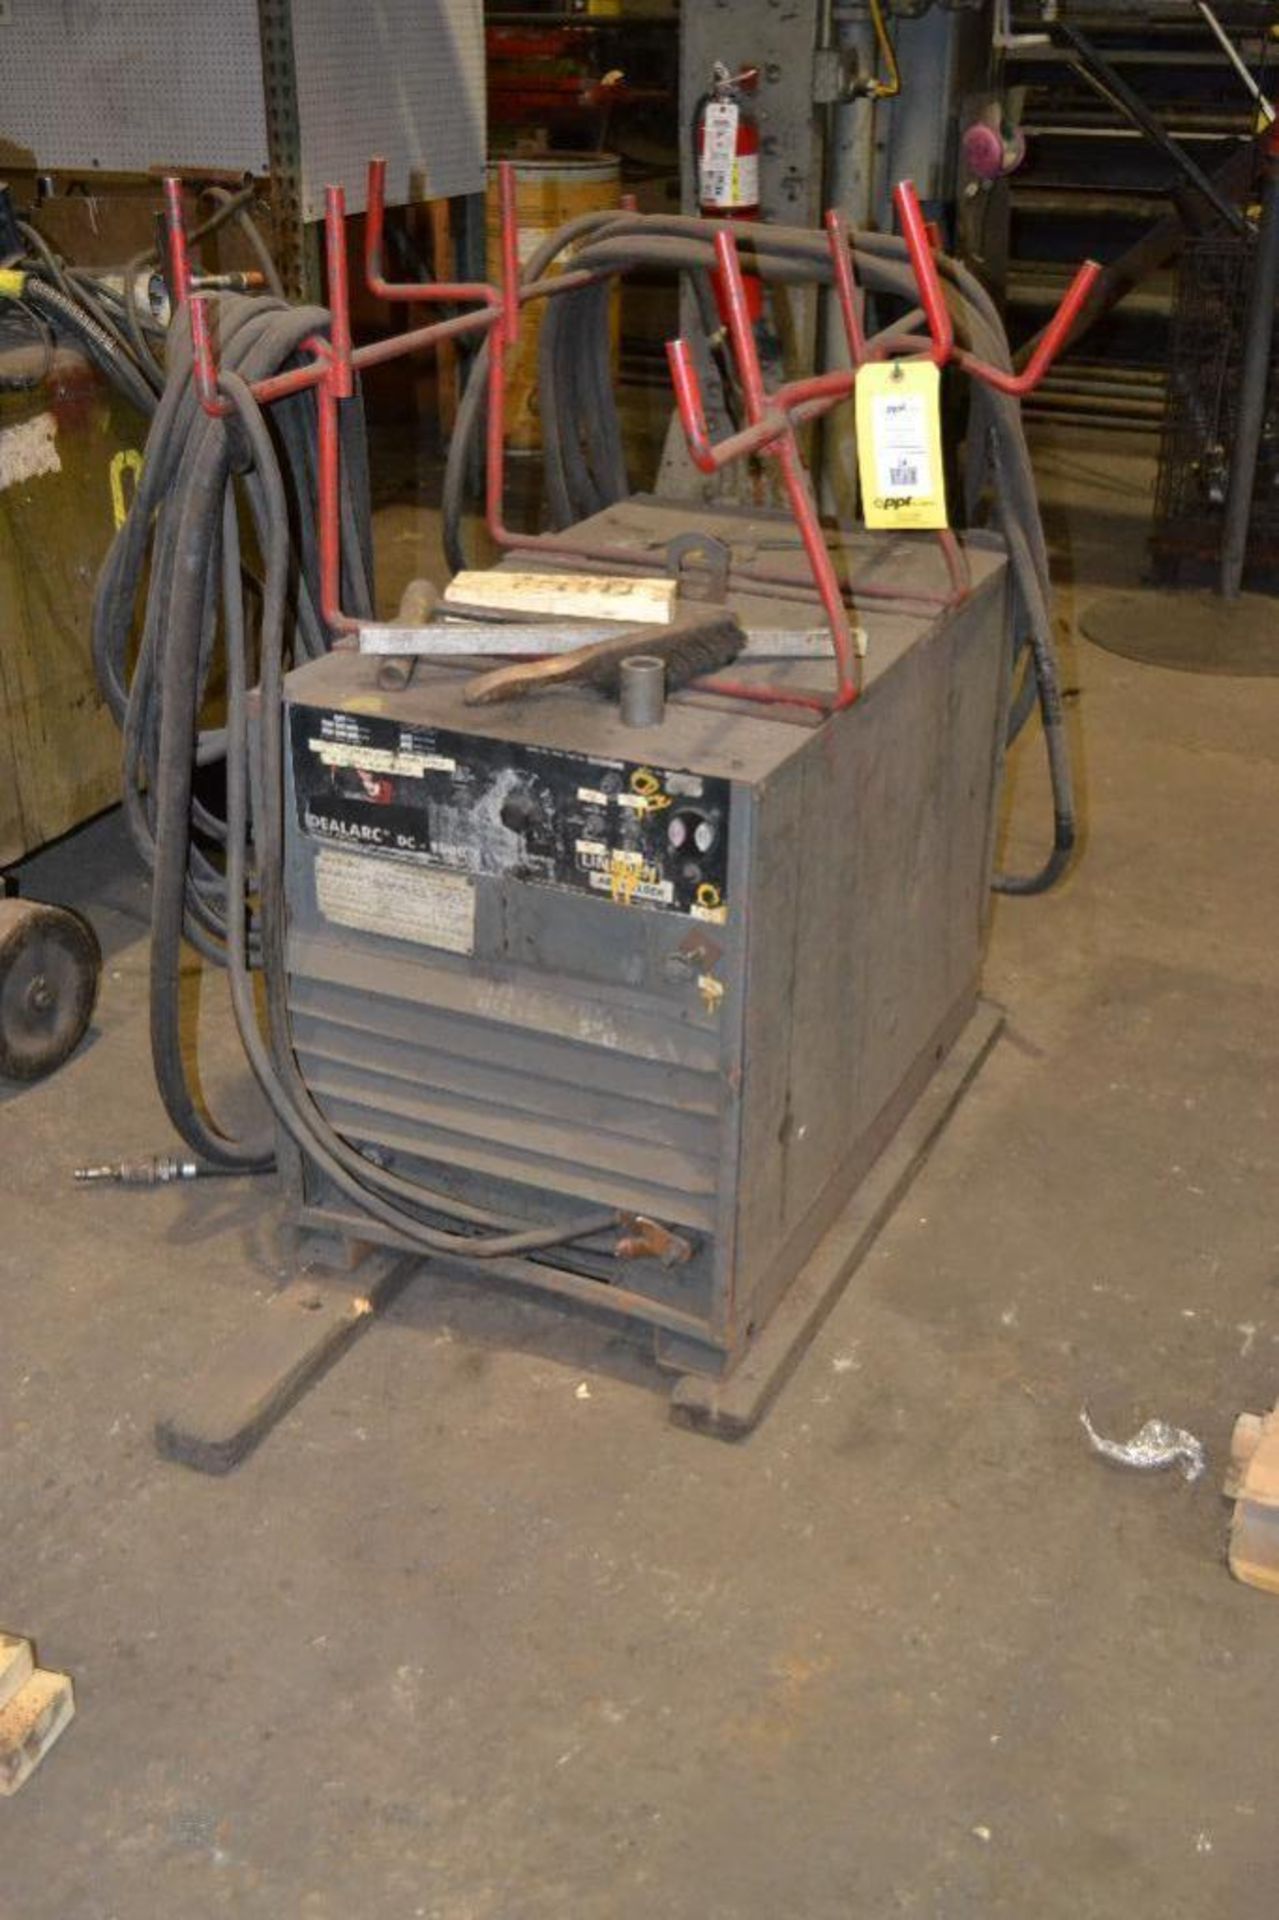 Lincoln 1000 Amp Welder Model DC1000, with Cables